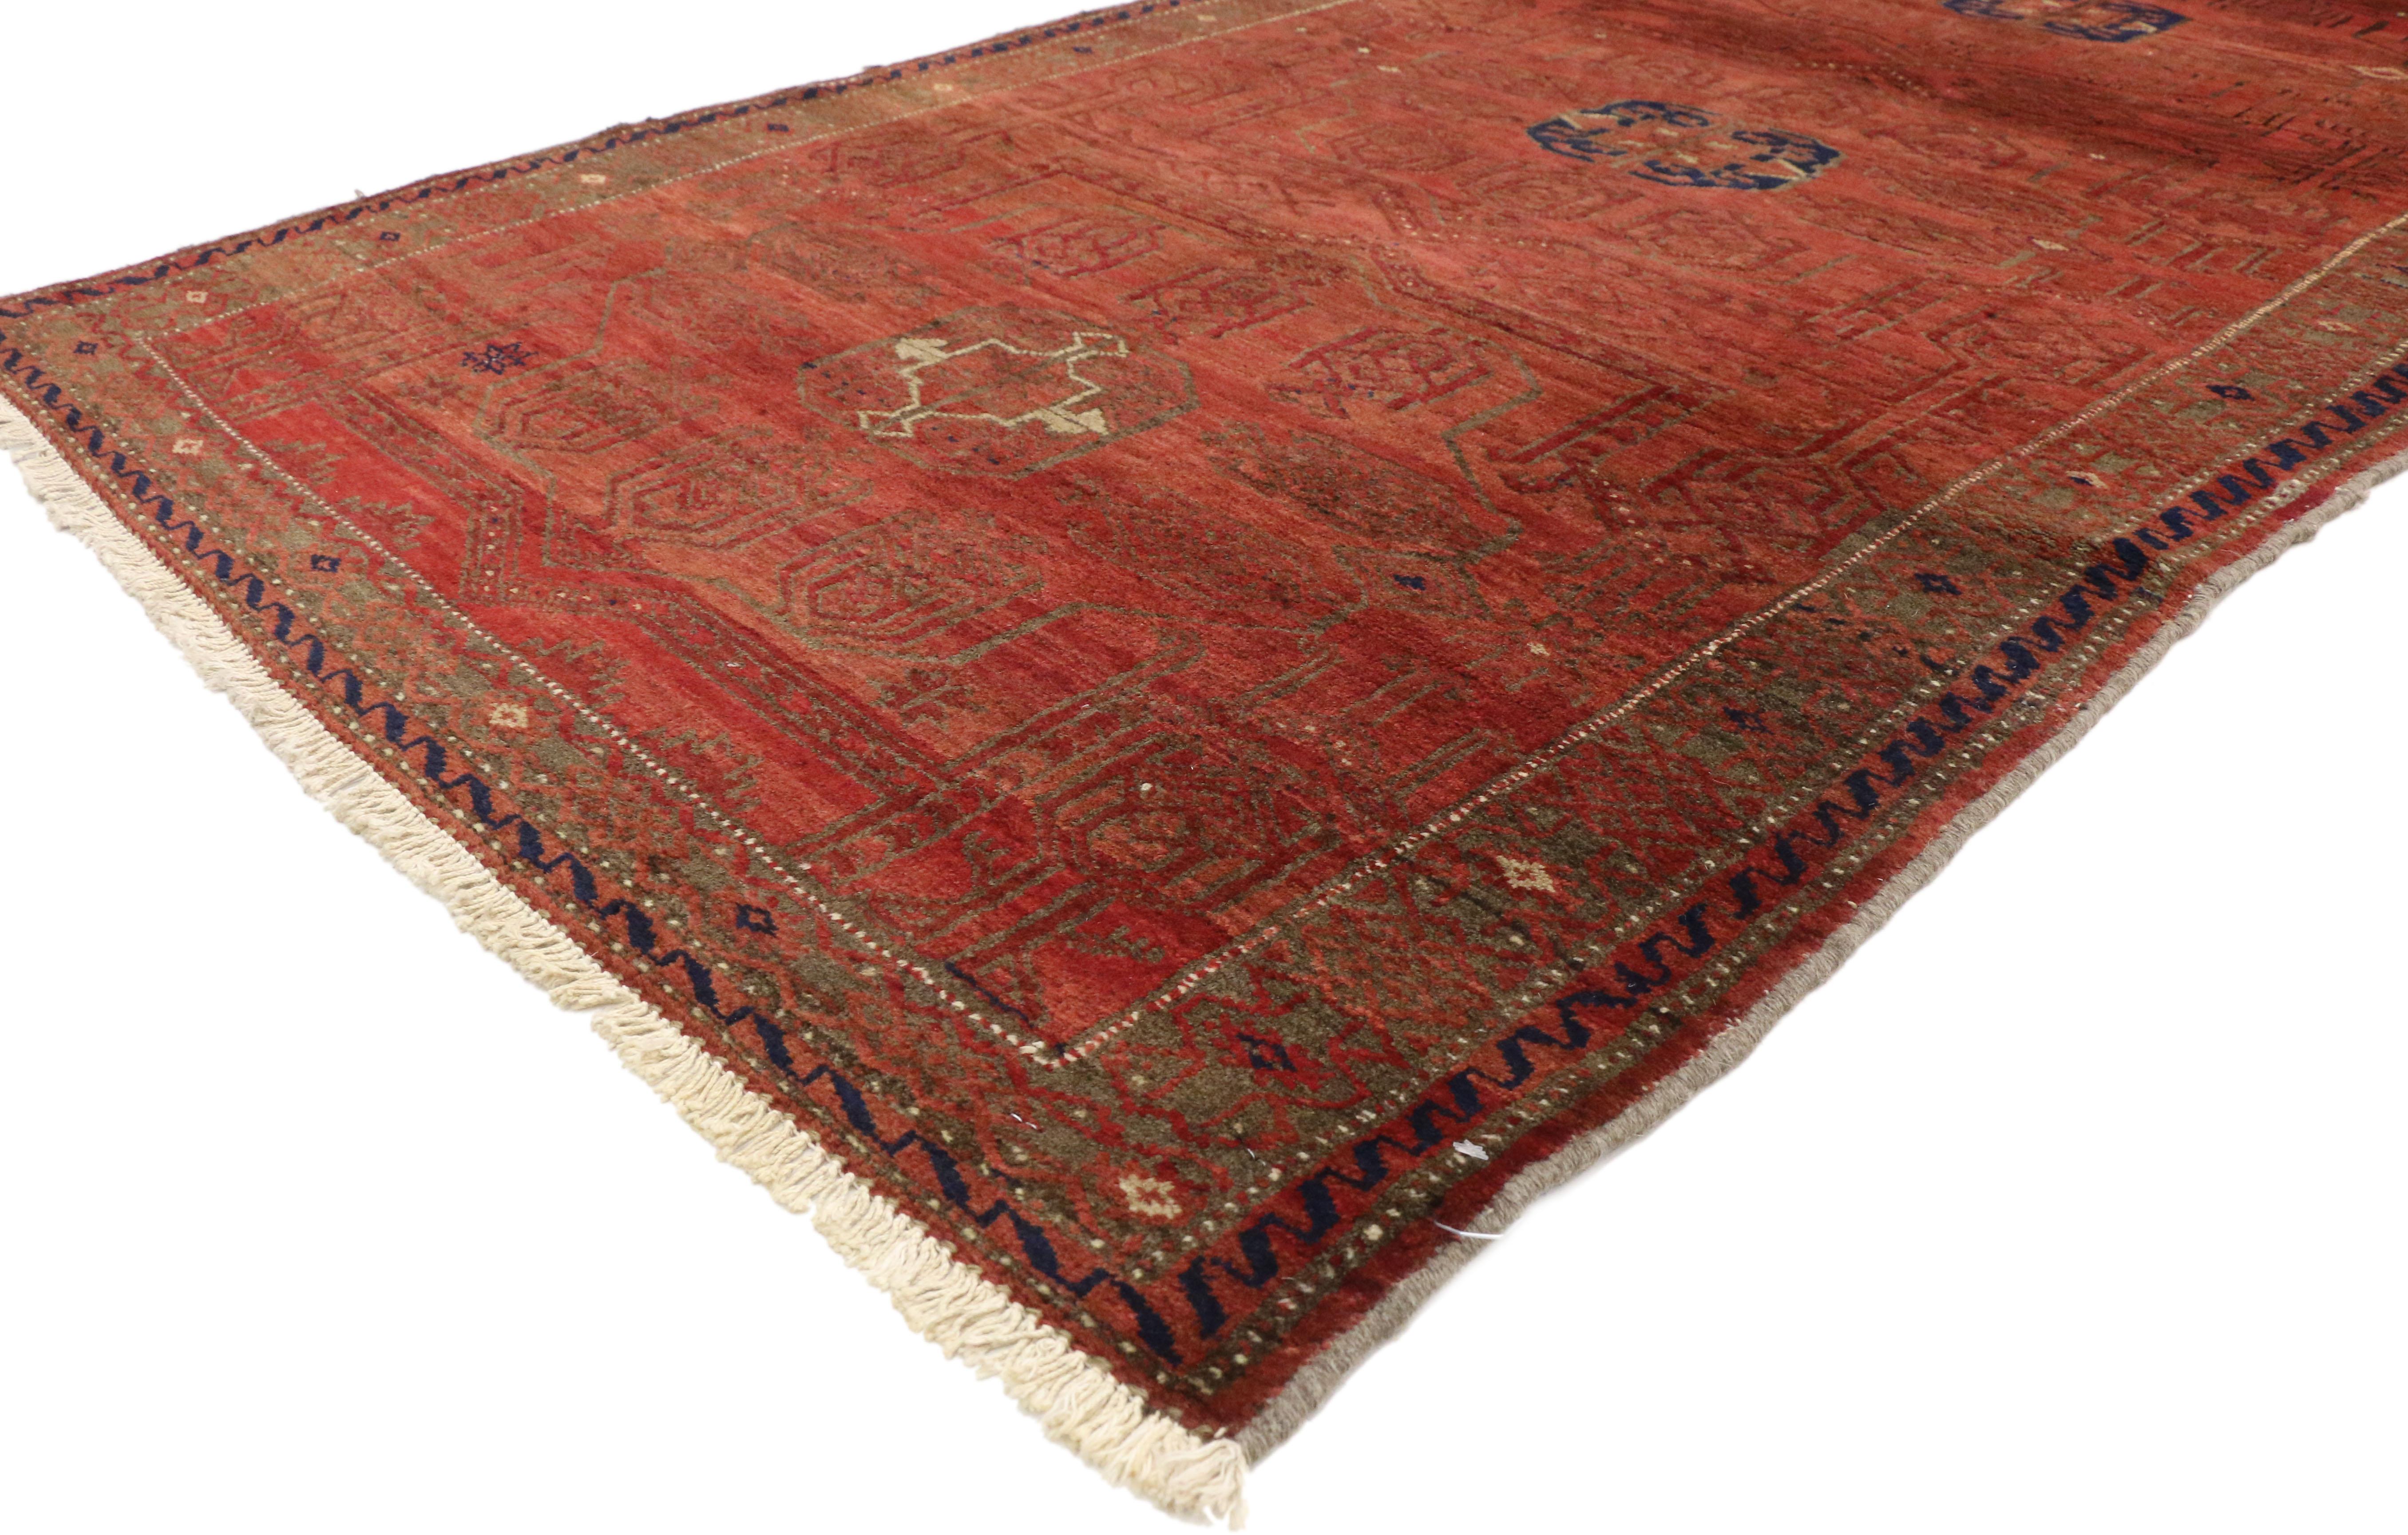 76495, vintage Persian Baluch hallway runner with Mid-Century Modern Tribal style. This hand knotted wool vintage Persian Baluch hallway runner features a large-scale pattern of four inconspicuous octofoil amulets filled with and surrounded by